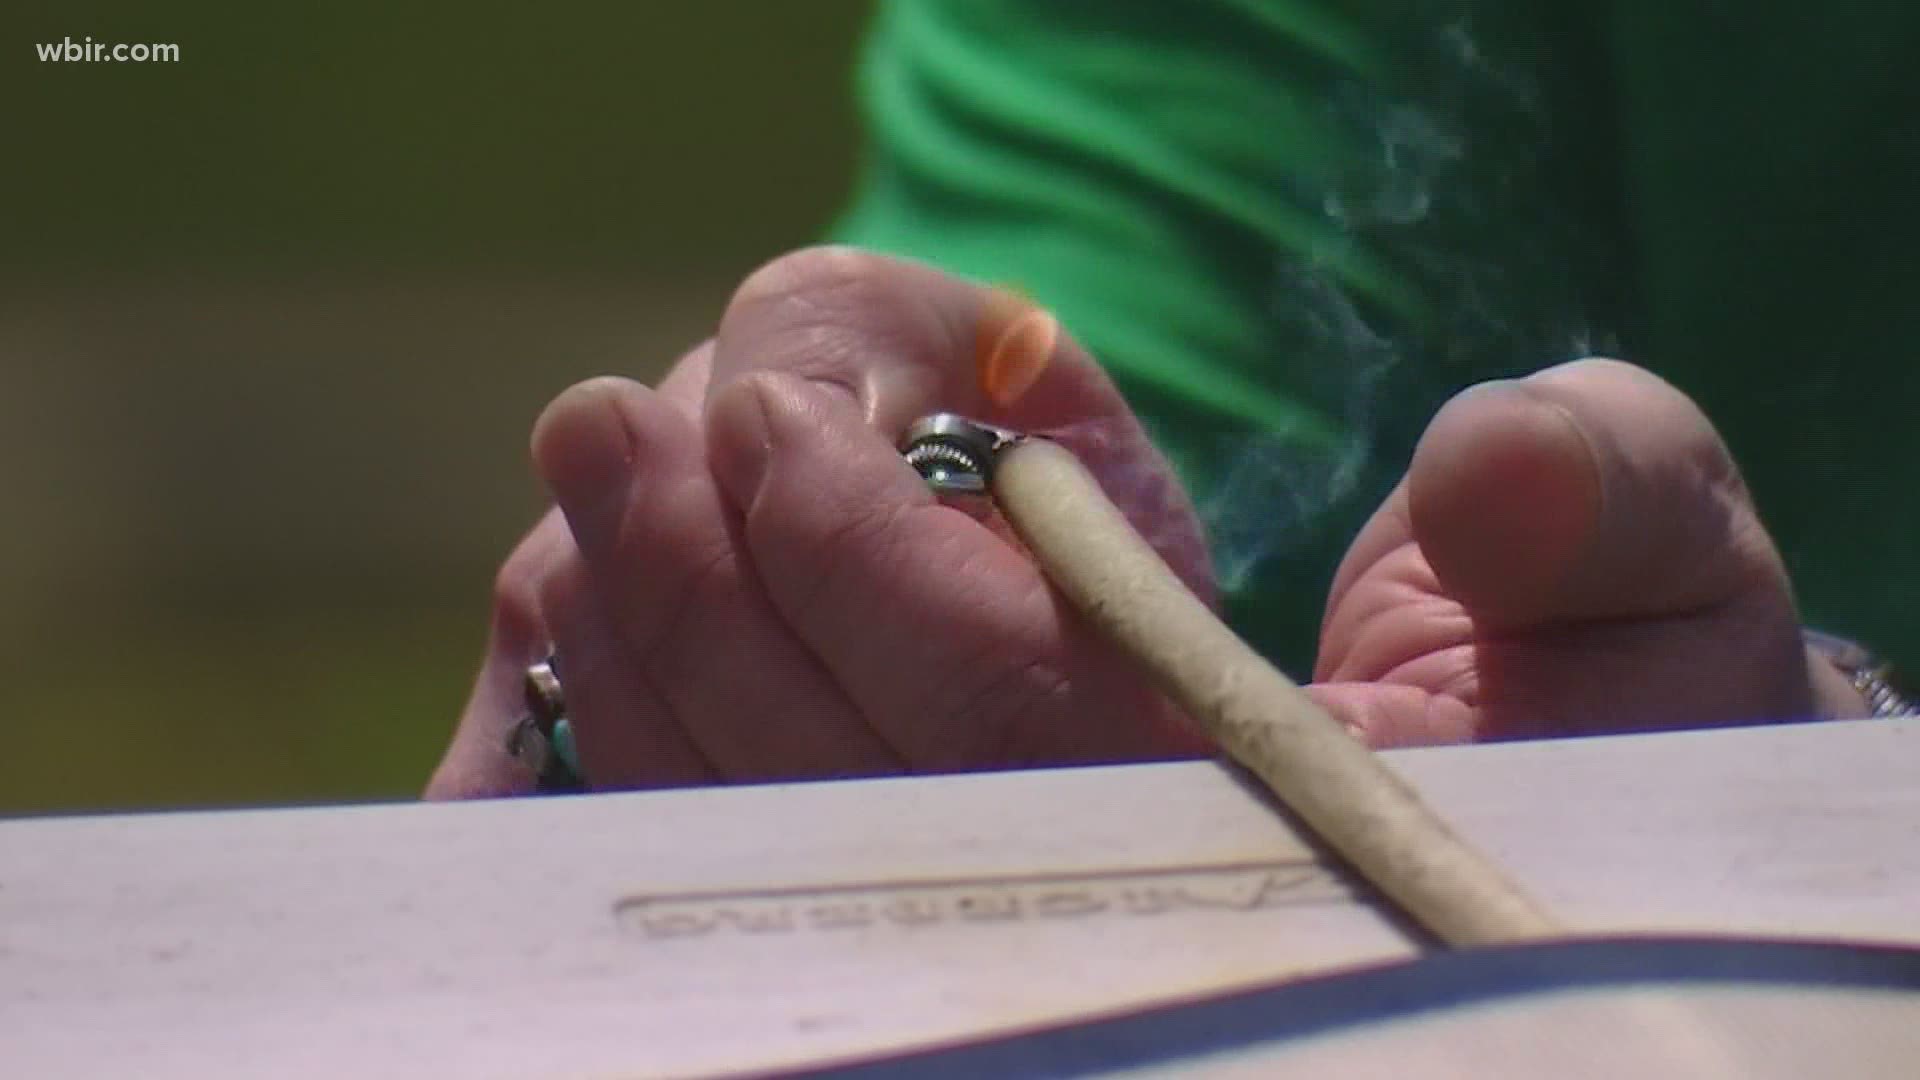 One man is pushing to legalize marijuana use in Tennessee, as several states across the U.S. allow it to be used.